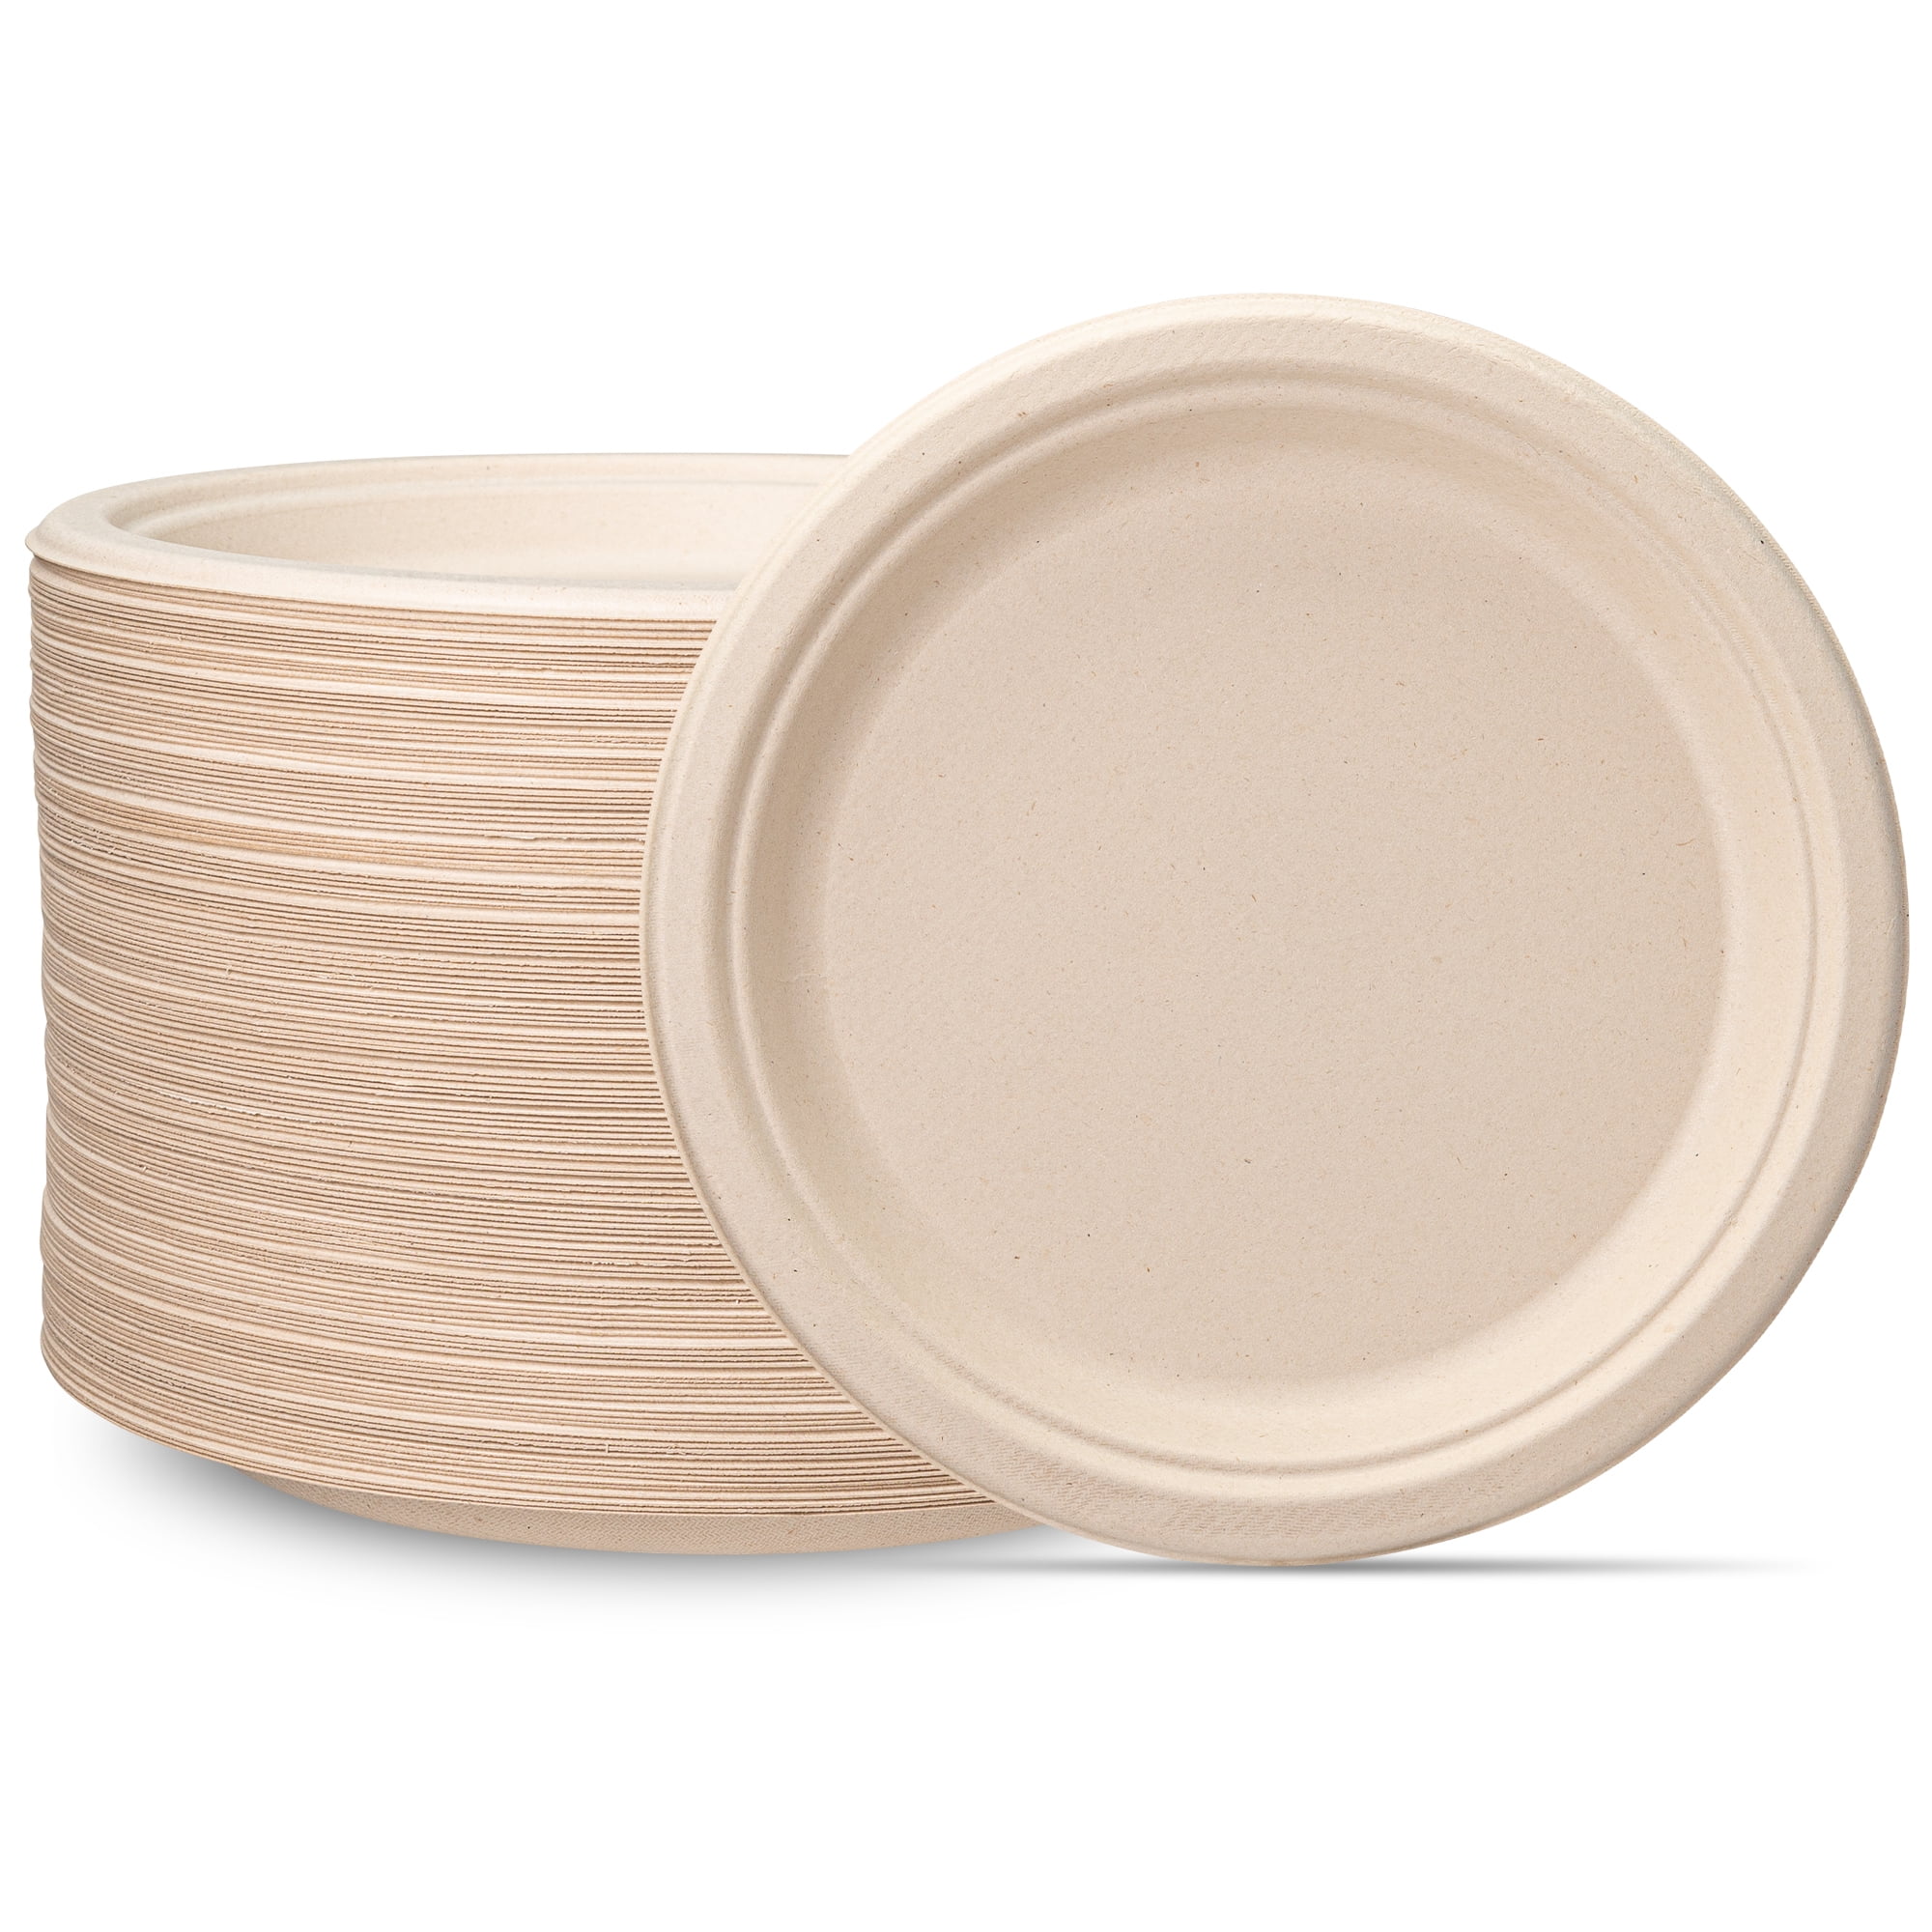 Comfy Package 9 Inch Paper Plates Heavy Duty Compostable Plates, 125-Pack 